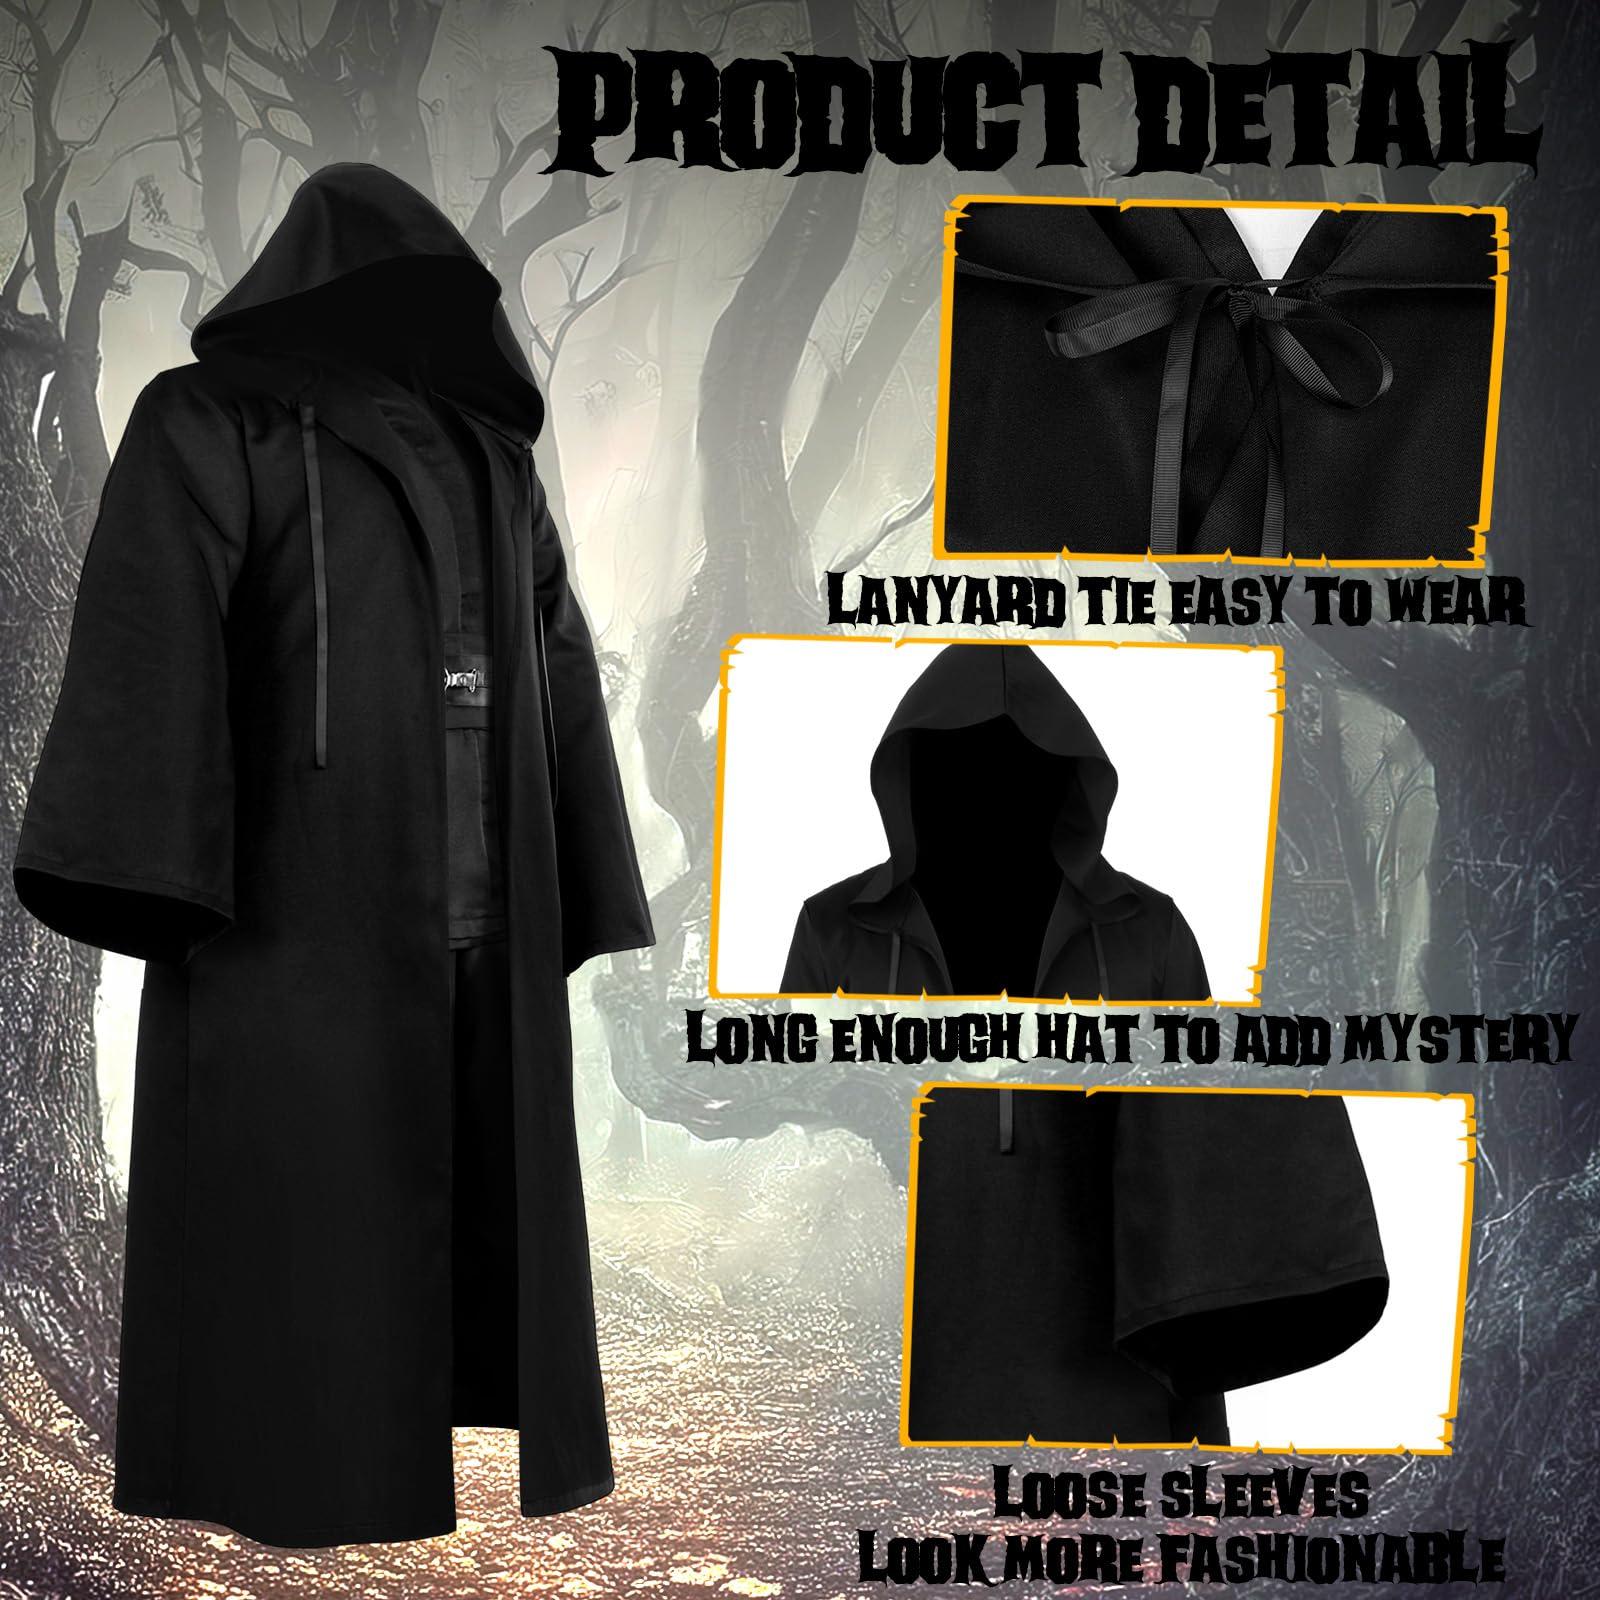 Hicarer Hooded Robe Cloak for Men Kid Halloween Wizard Costume Knight Cosplay Elven Cape Medieval Renaissance Costume (Black,Kid, Small) 2